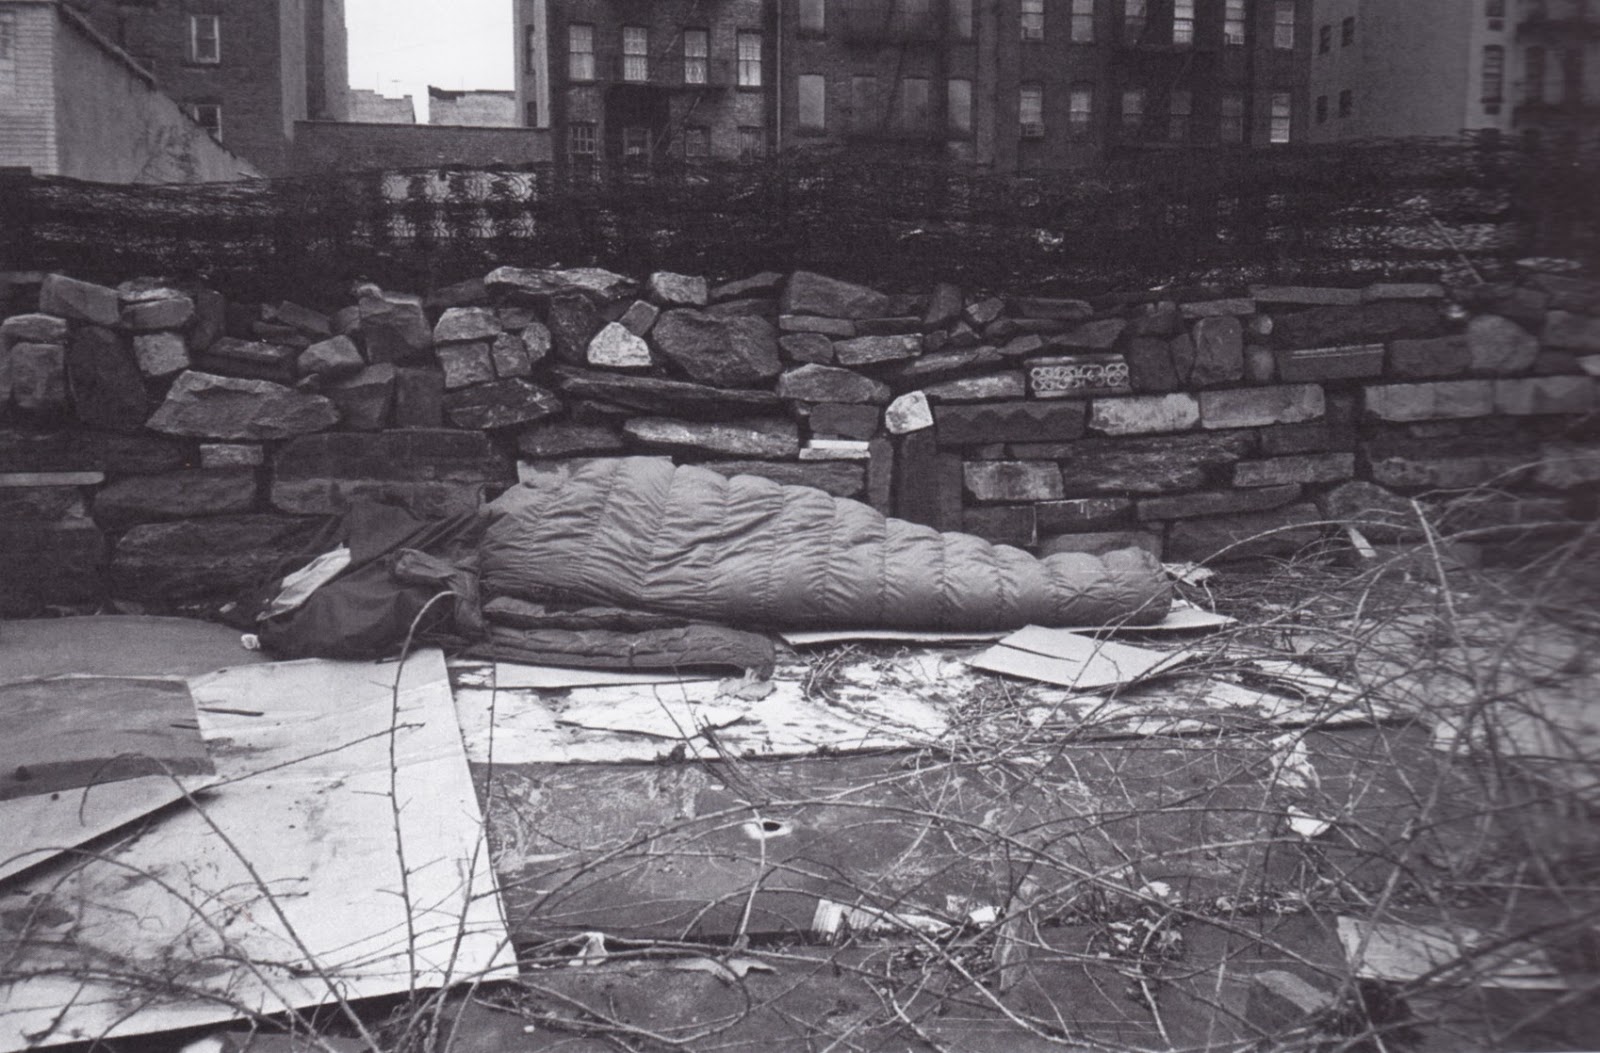 Tehching Hsieh, One Year Performance, 1981-2, 1